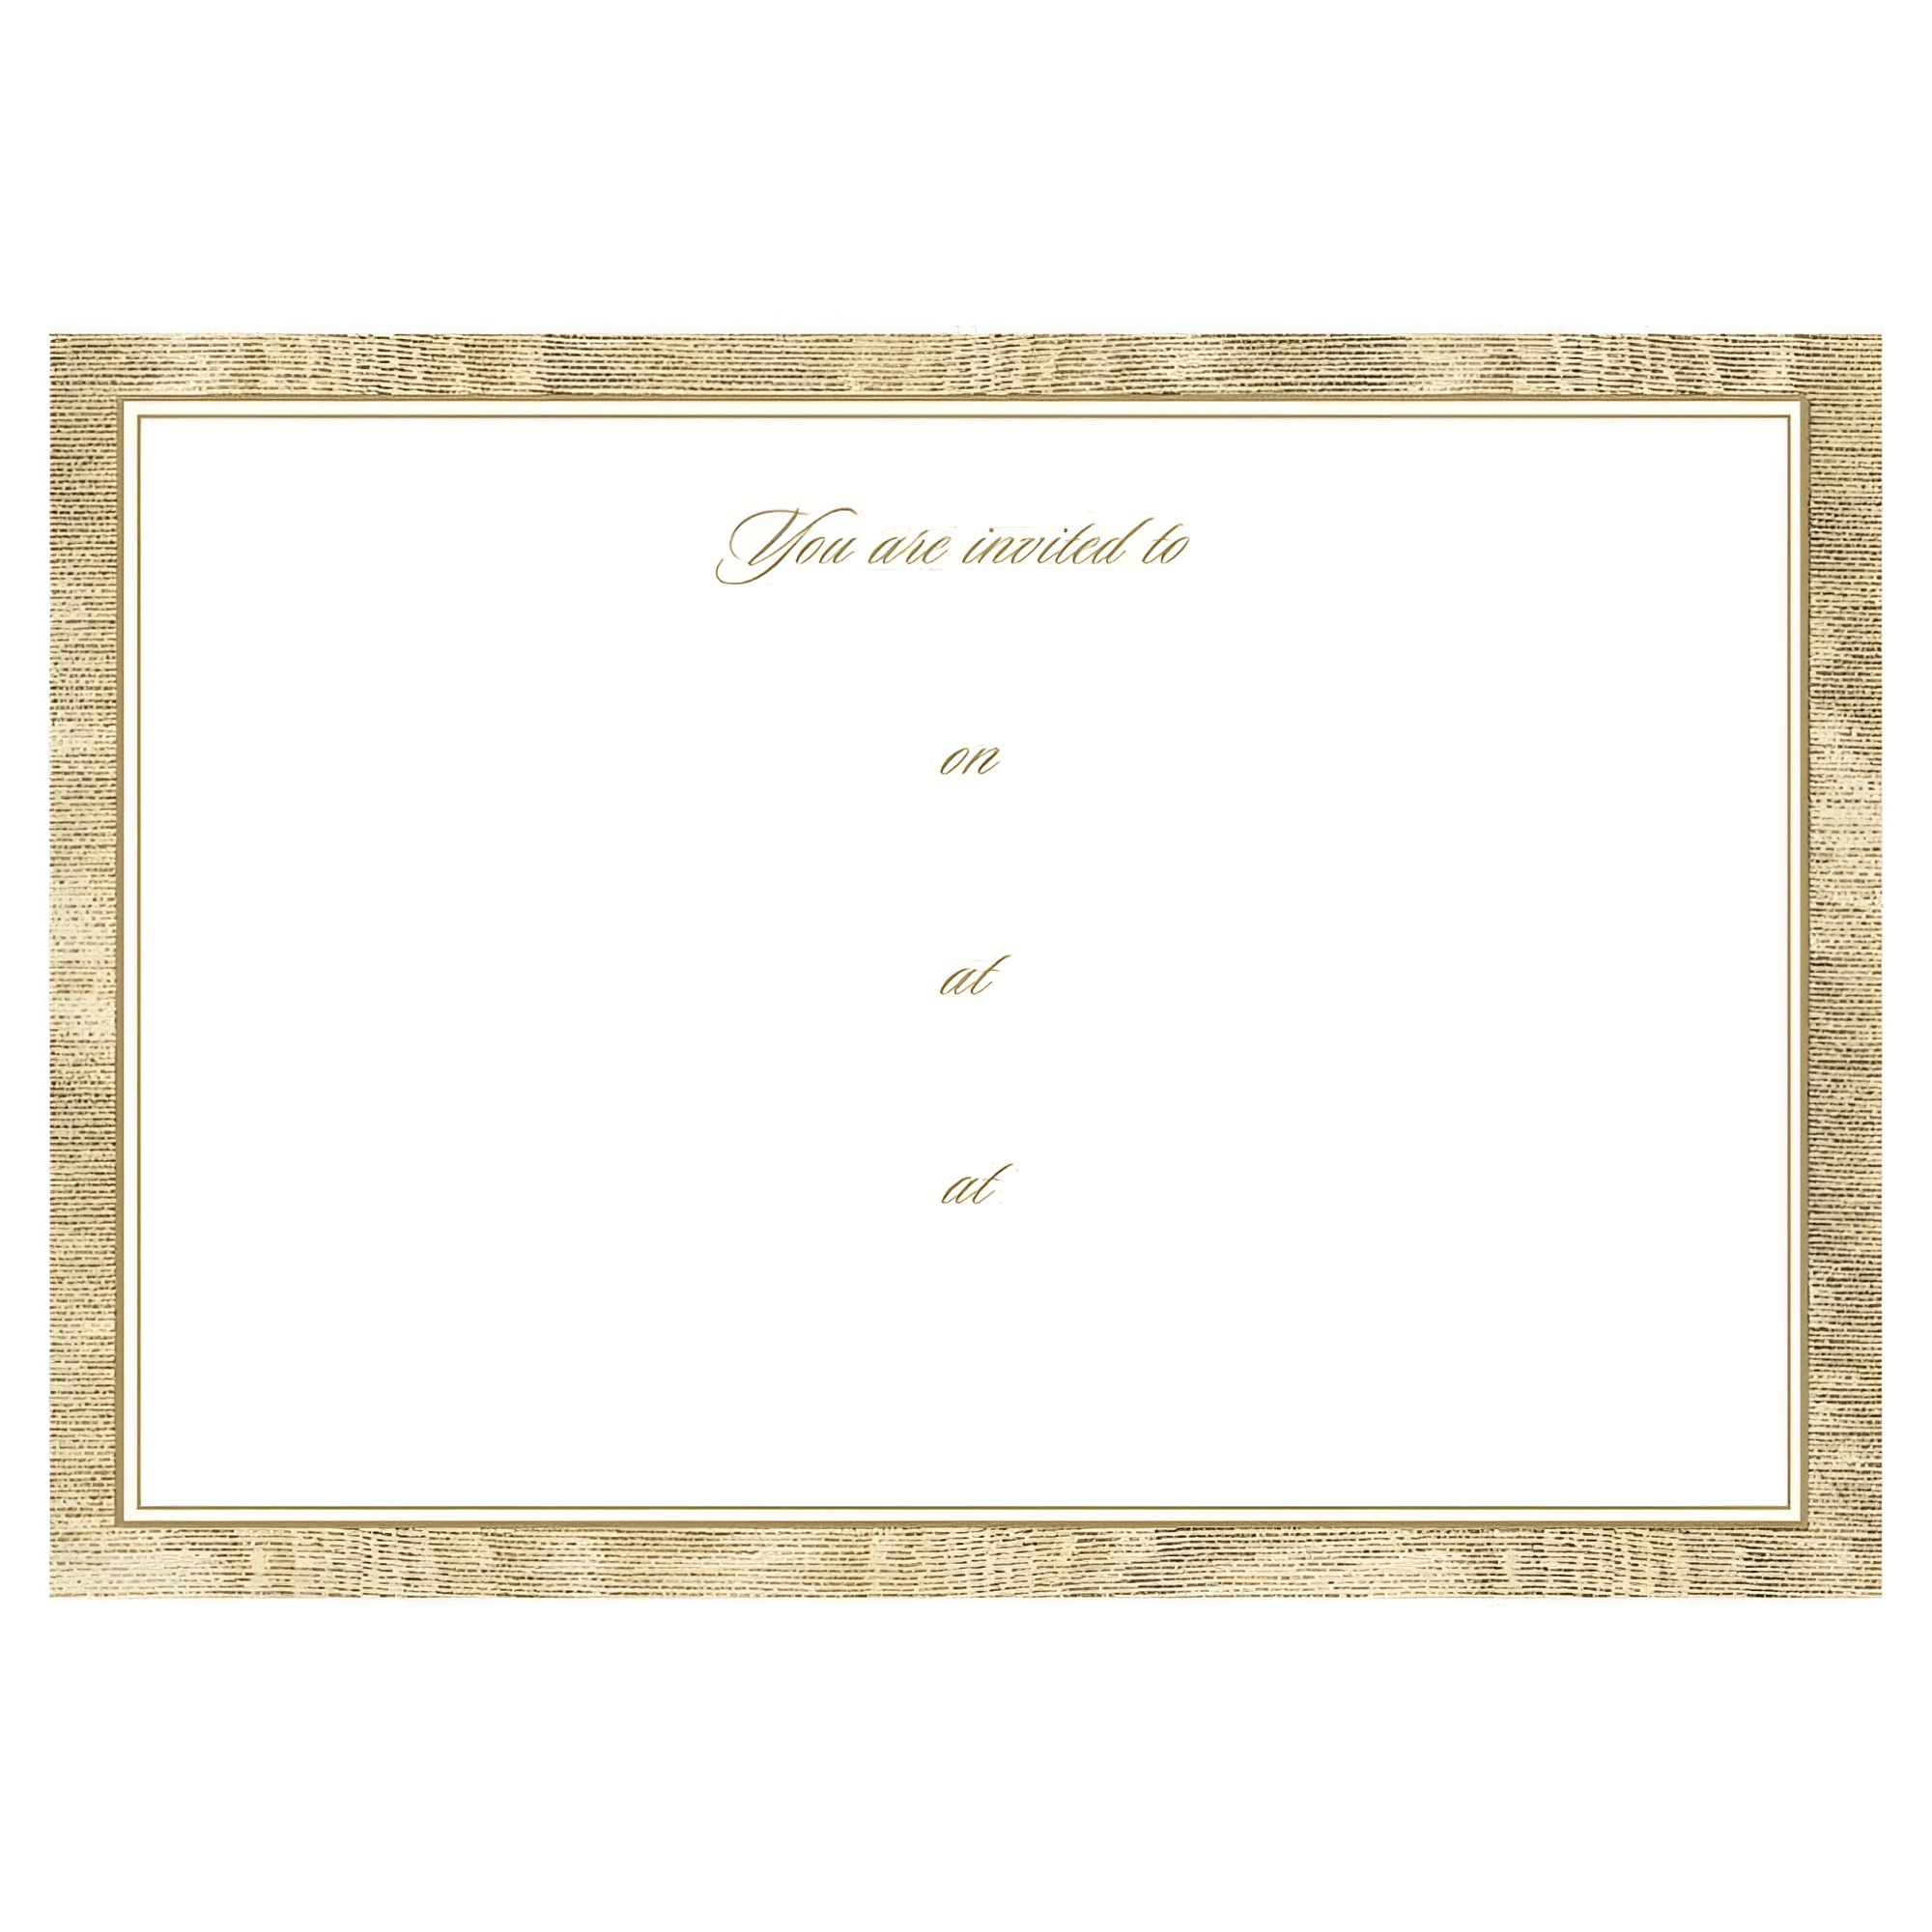 Moire Invitation Cards with gold-bordered rectangular frame and white text.